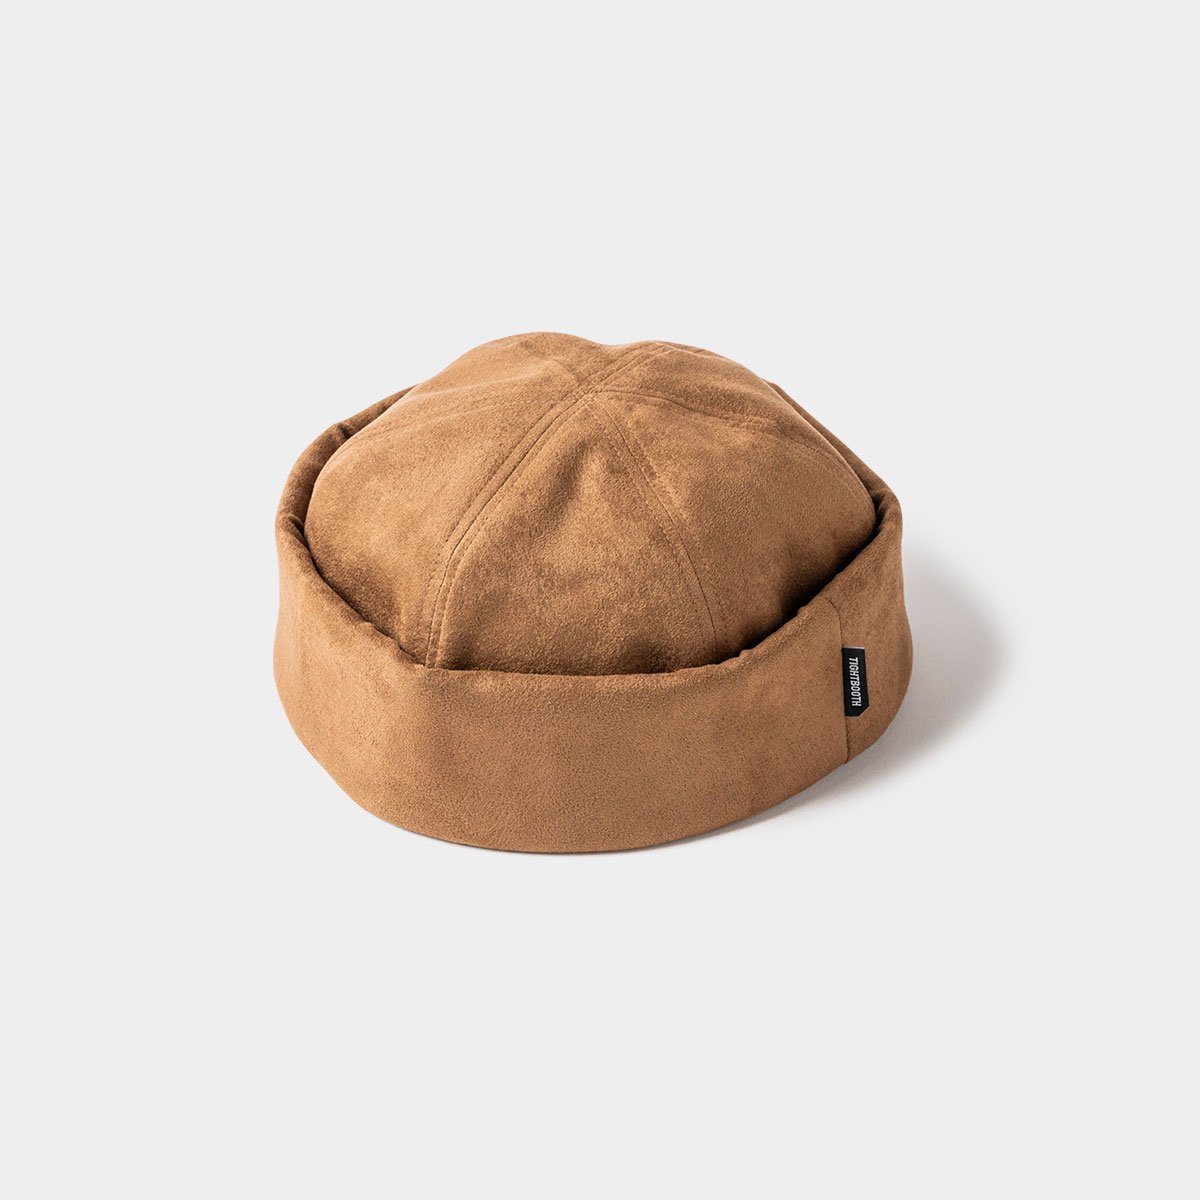 TIGHTBOOTH   SUEDE ROLL CAP   SHRED